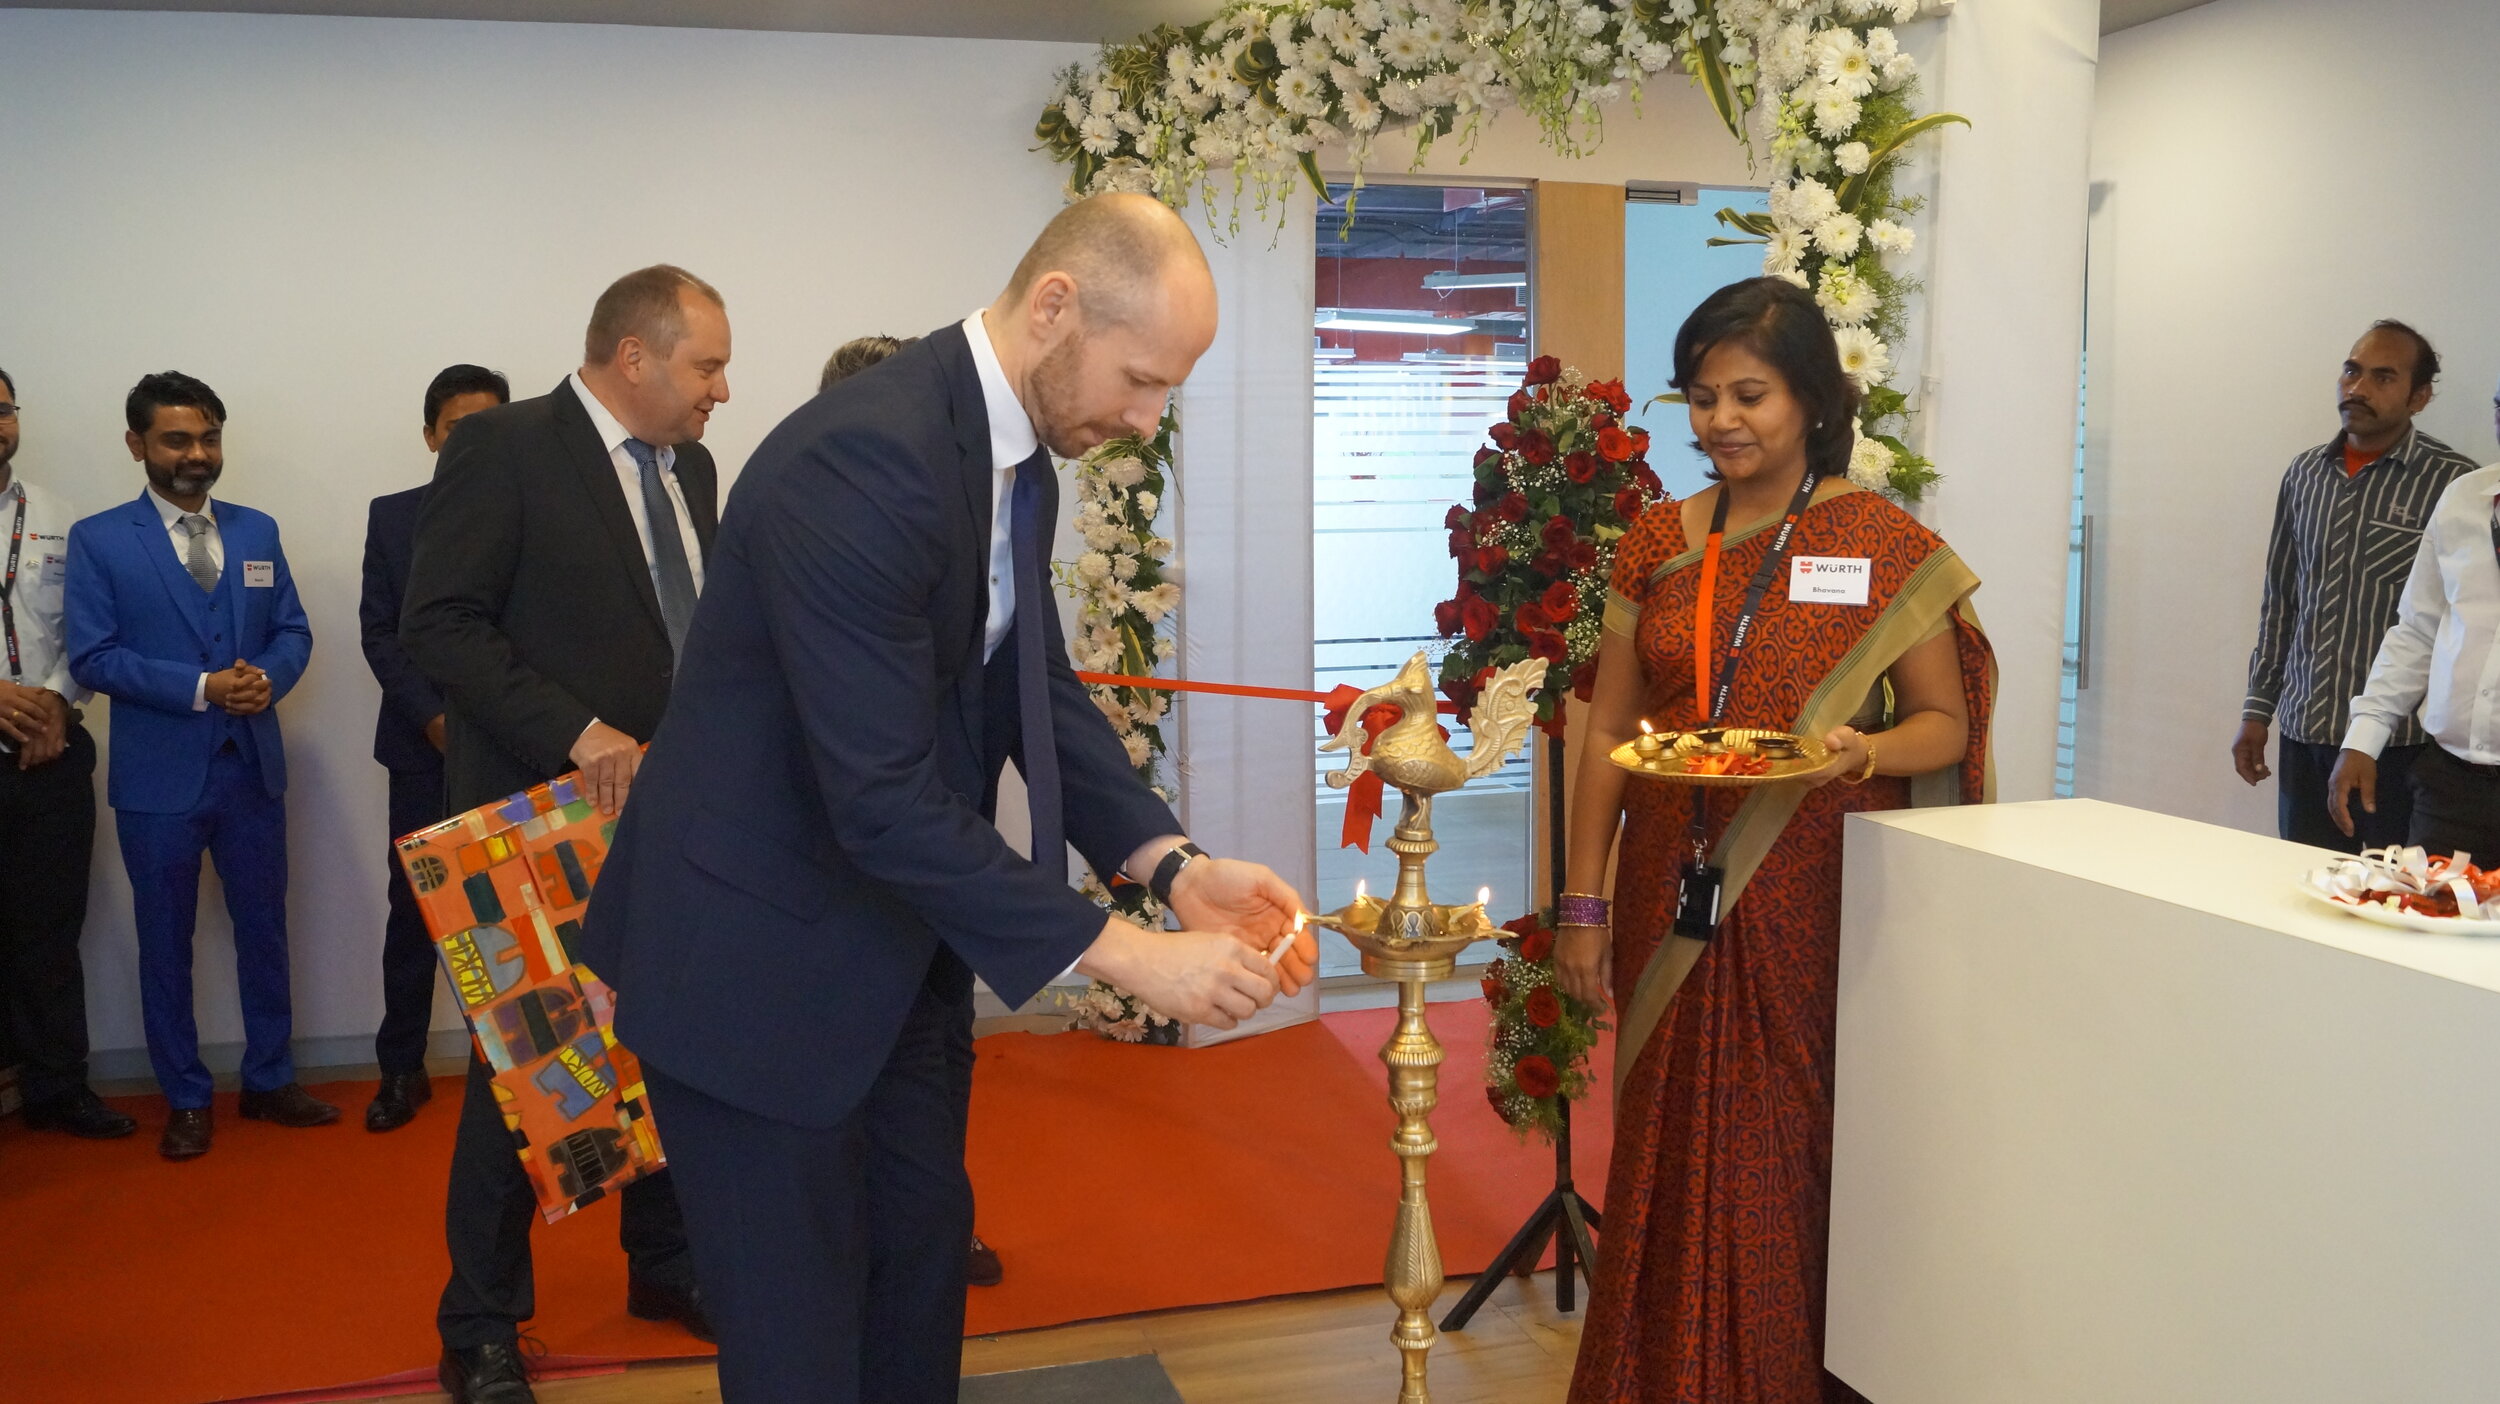 CEO Norman Dentel at the opening ceremony of one of Würth's offices in Pune